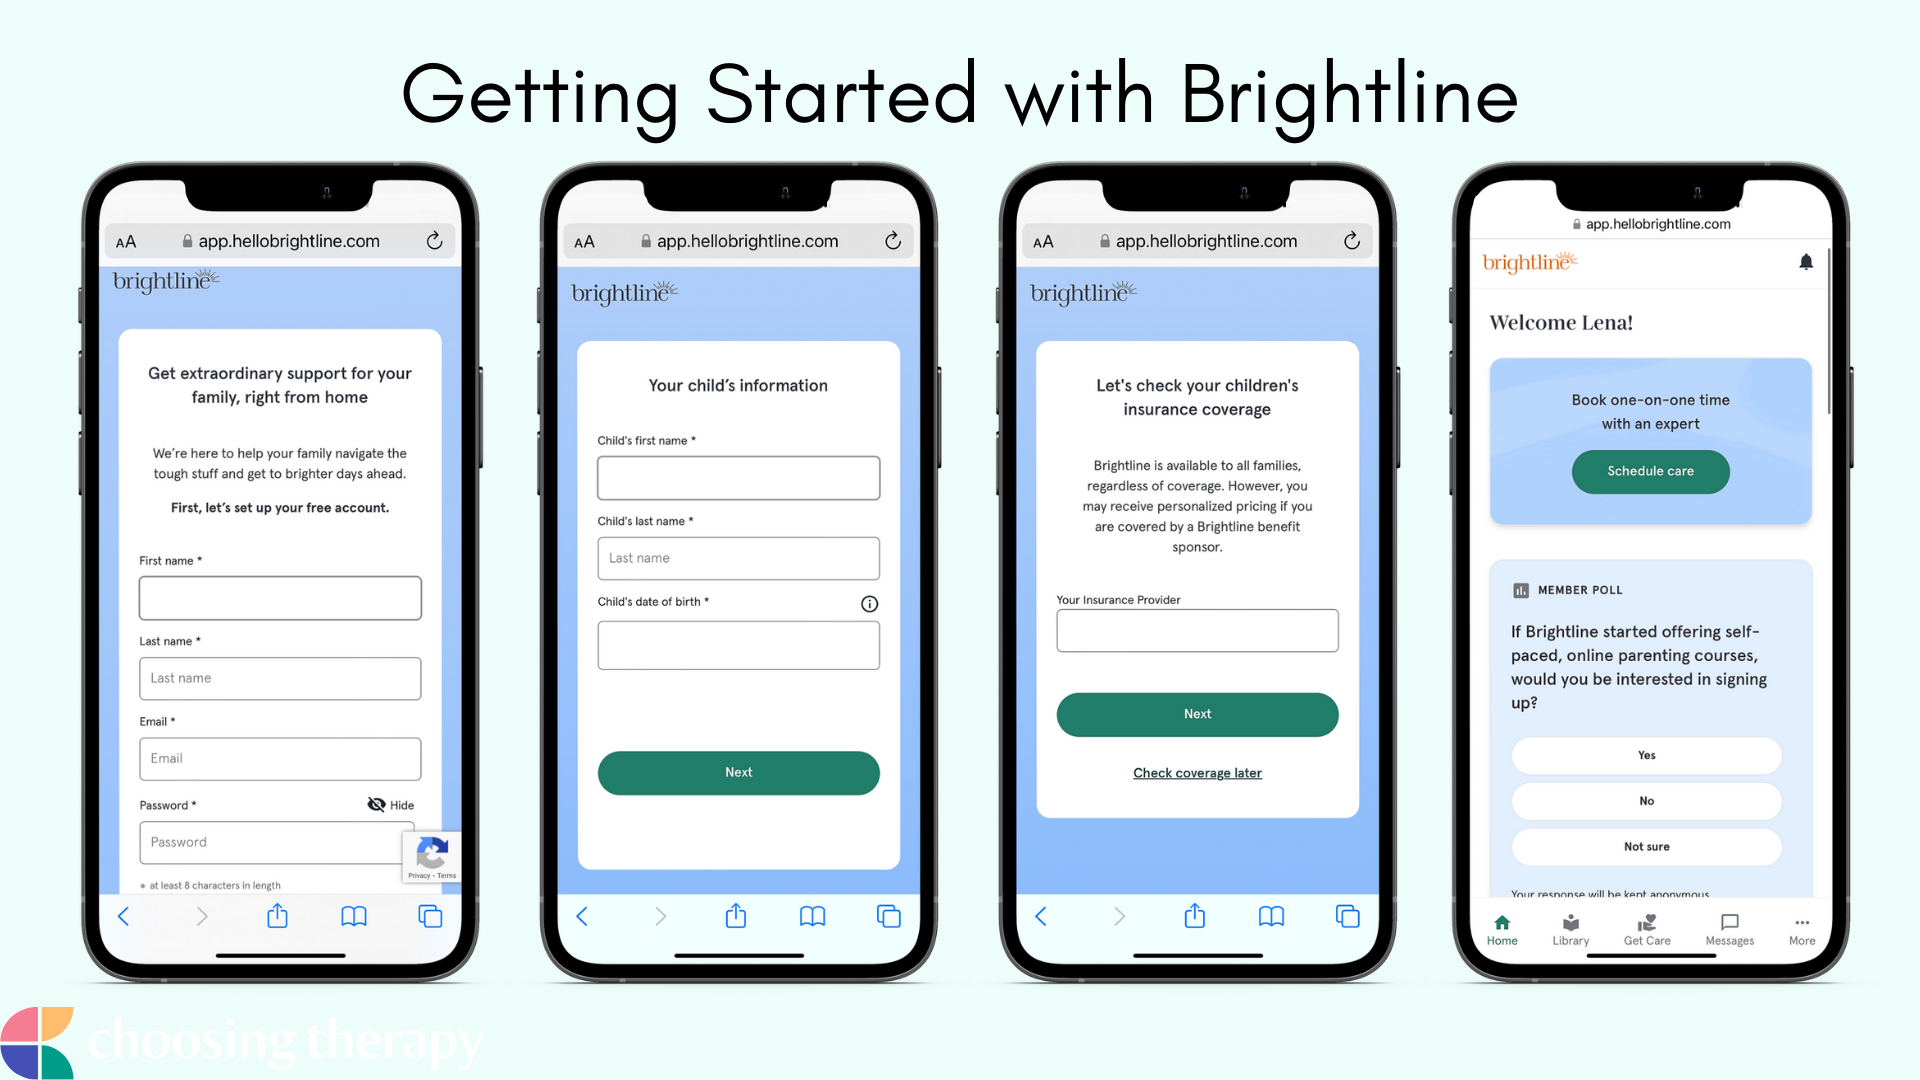 Image of how to get started with Brightline services